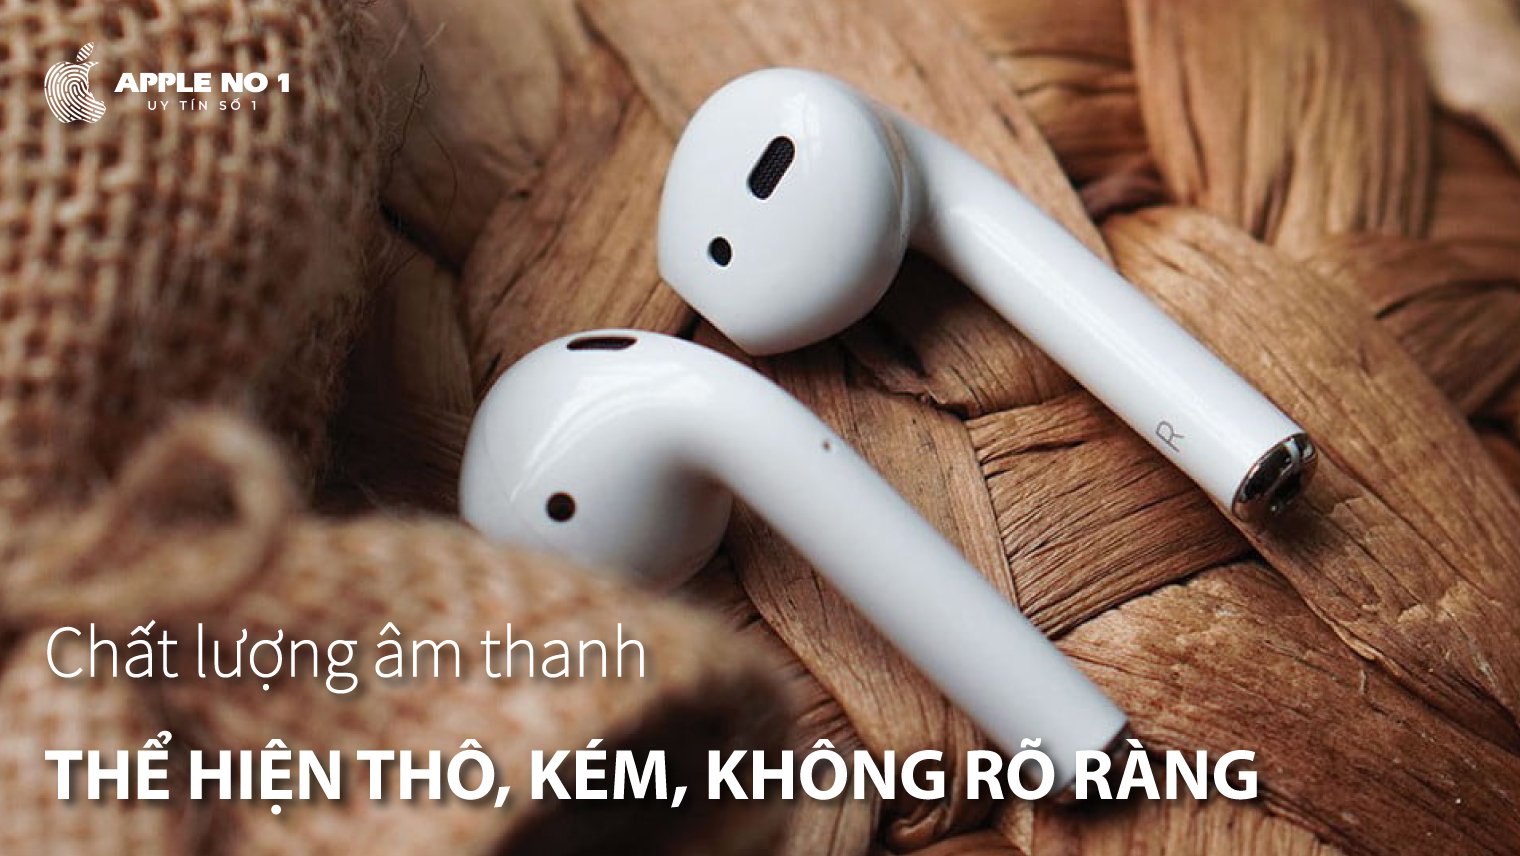 review tai nghe airpod 2 rep 1.1 ve chat luong am thanh